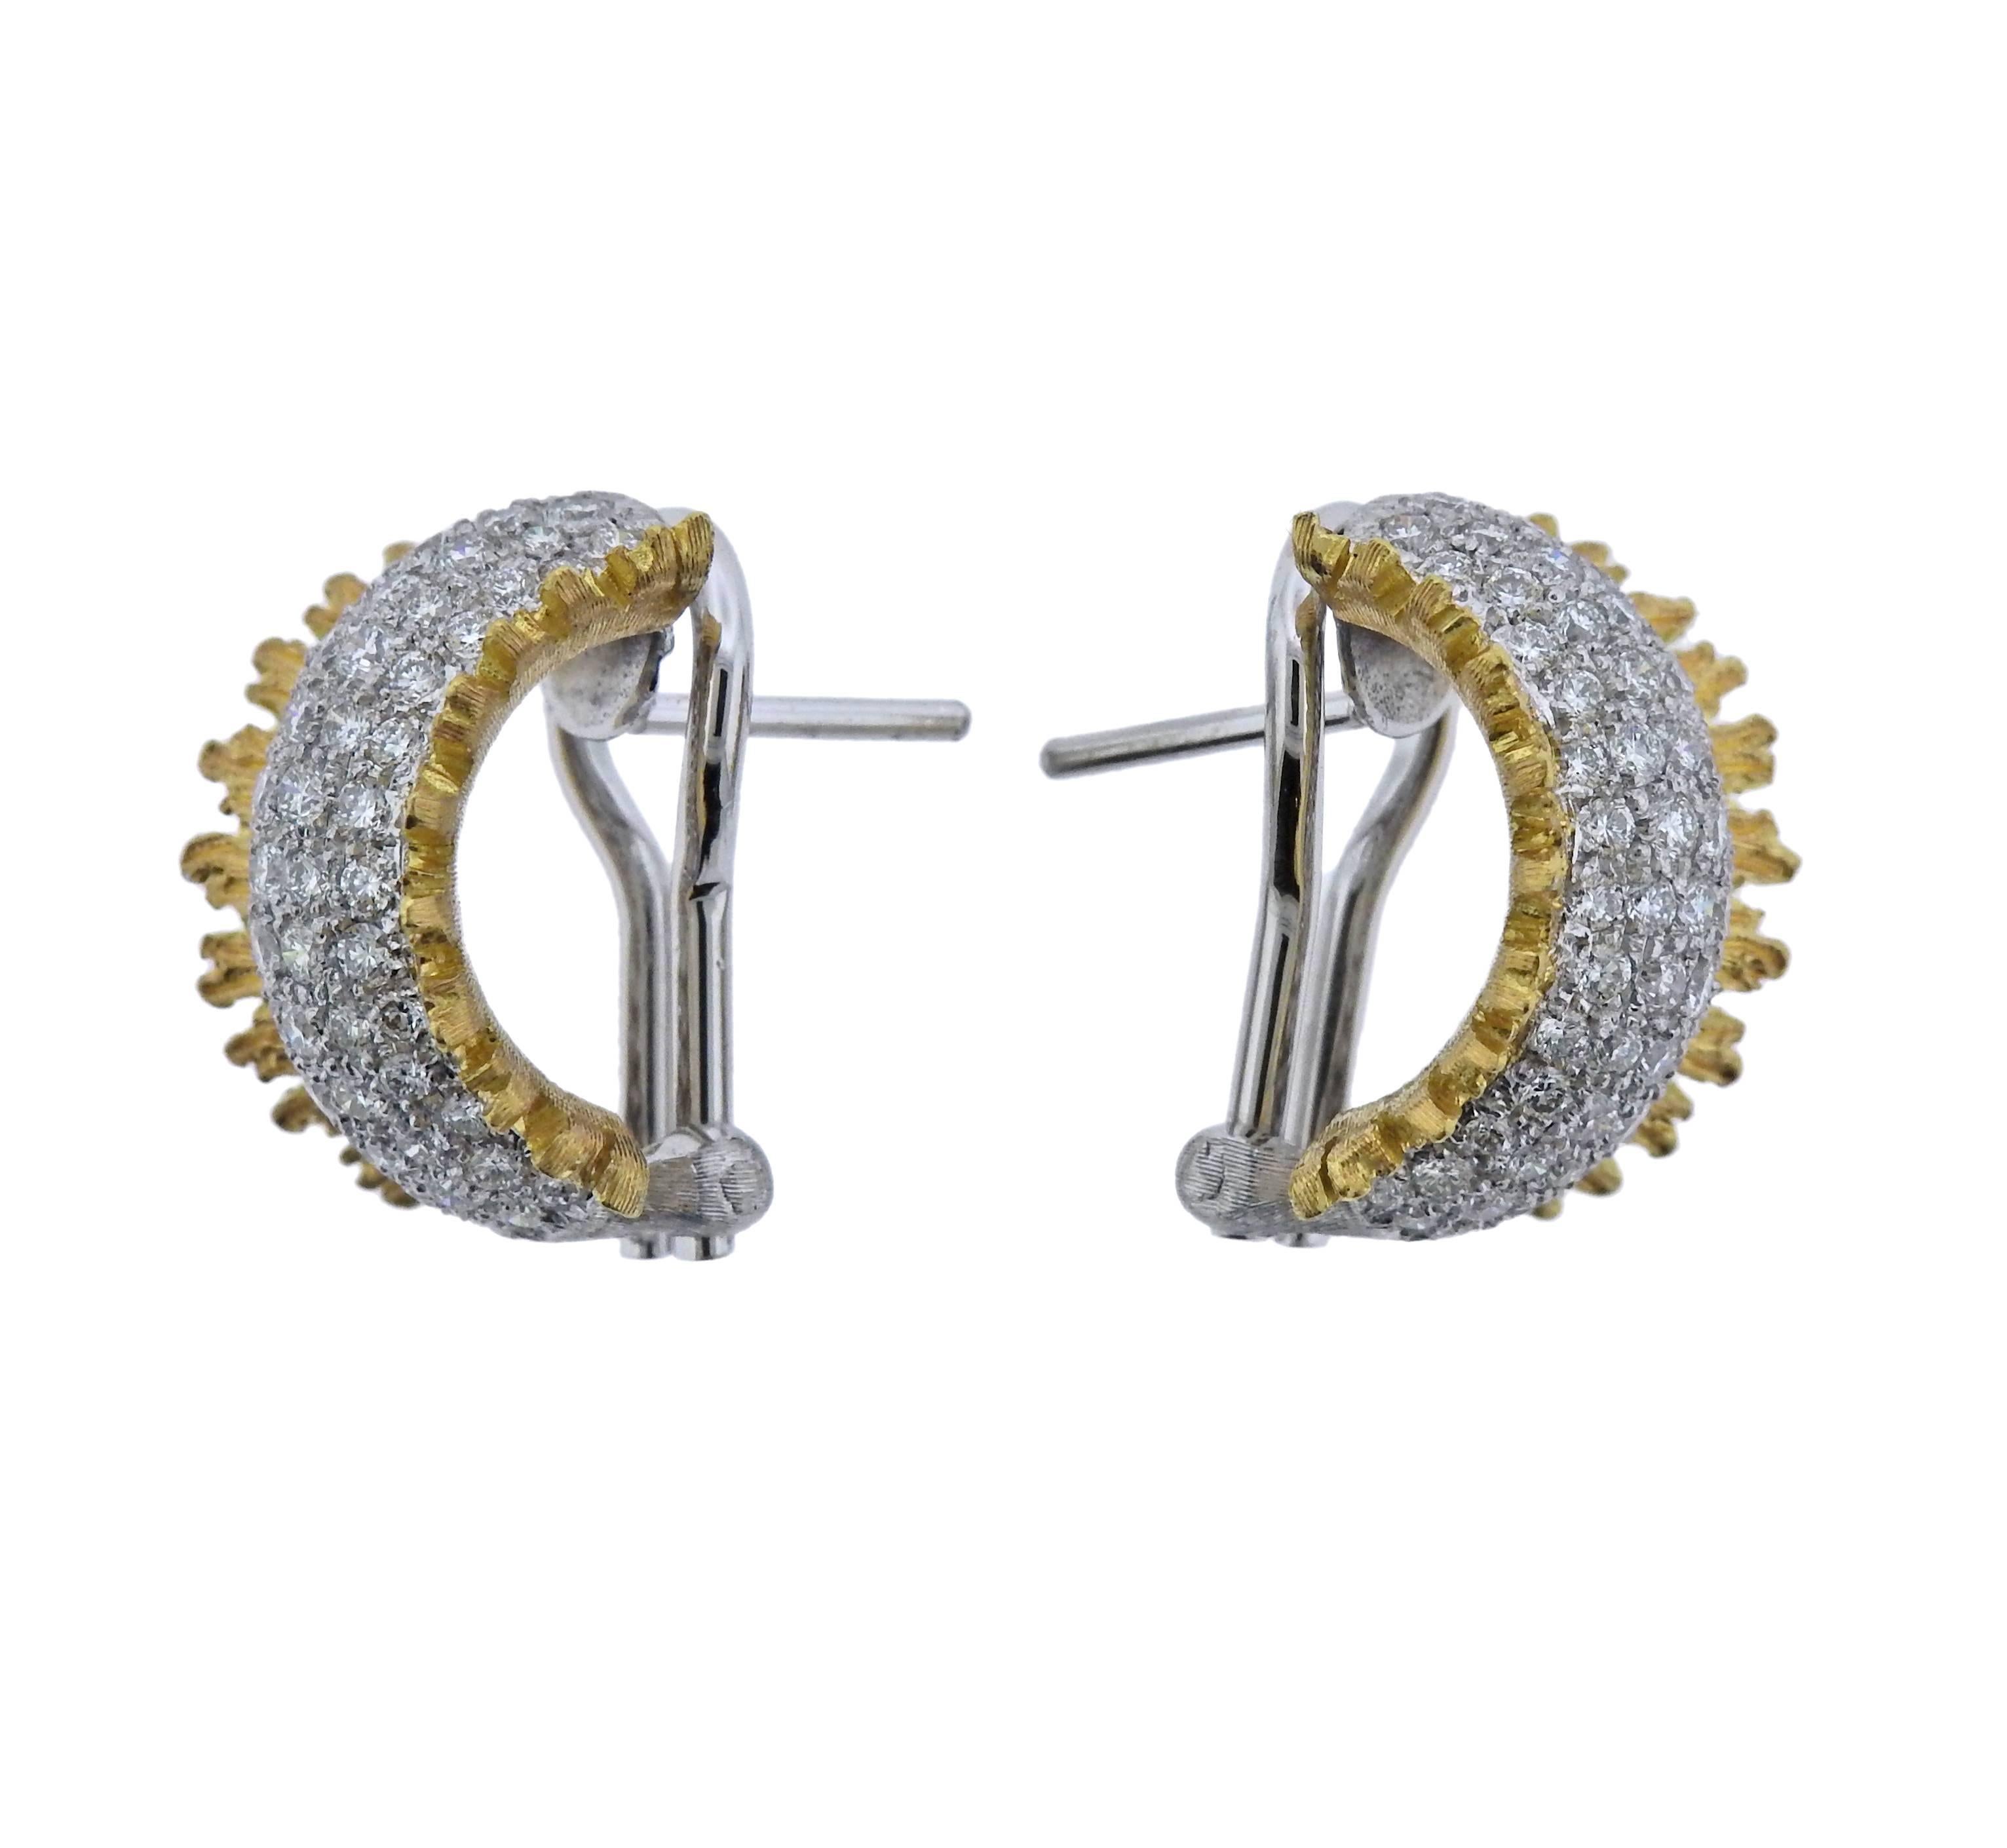 18k yellow and white gold hoop earrings, crafted by Buccellati, set with approx. 1.40ctw in H/VS diamonds. Retail $20900. Earrings 16mm x 11mm, weigh 9.7 grams. Marked: Buccellati, 750, Italy, M6272.